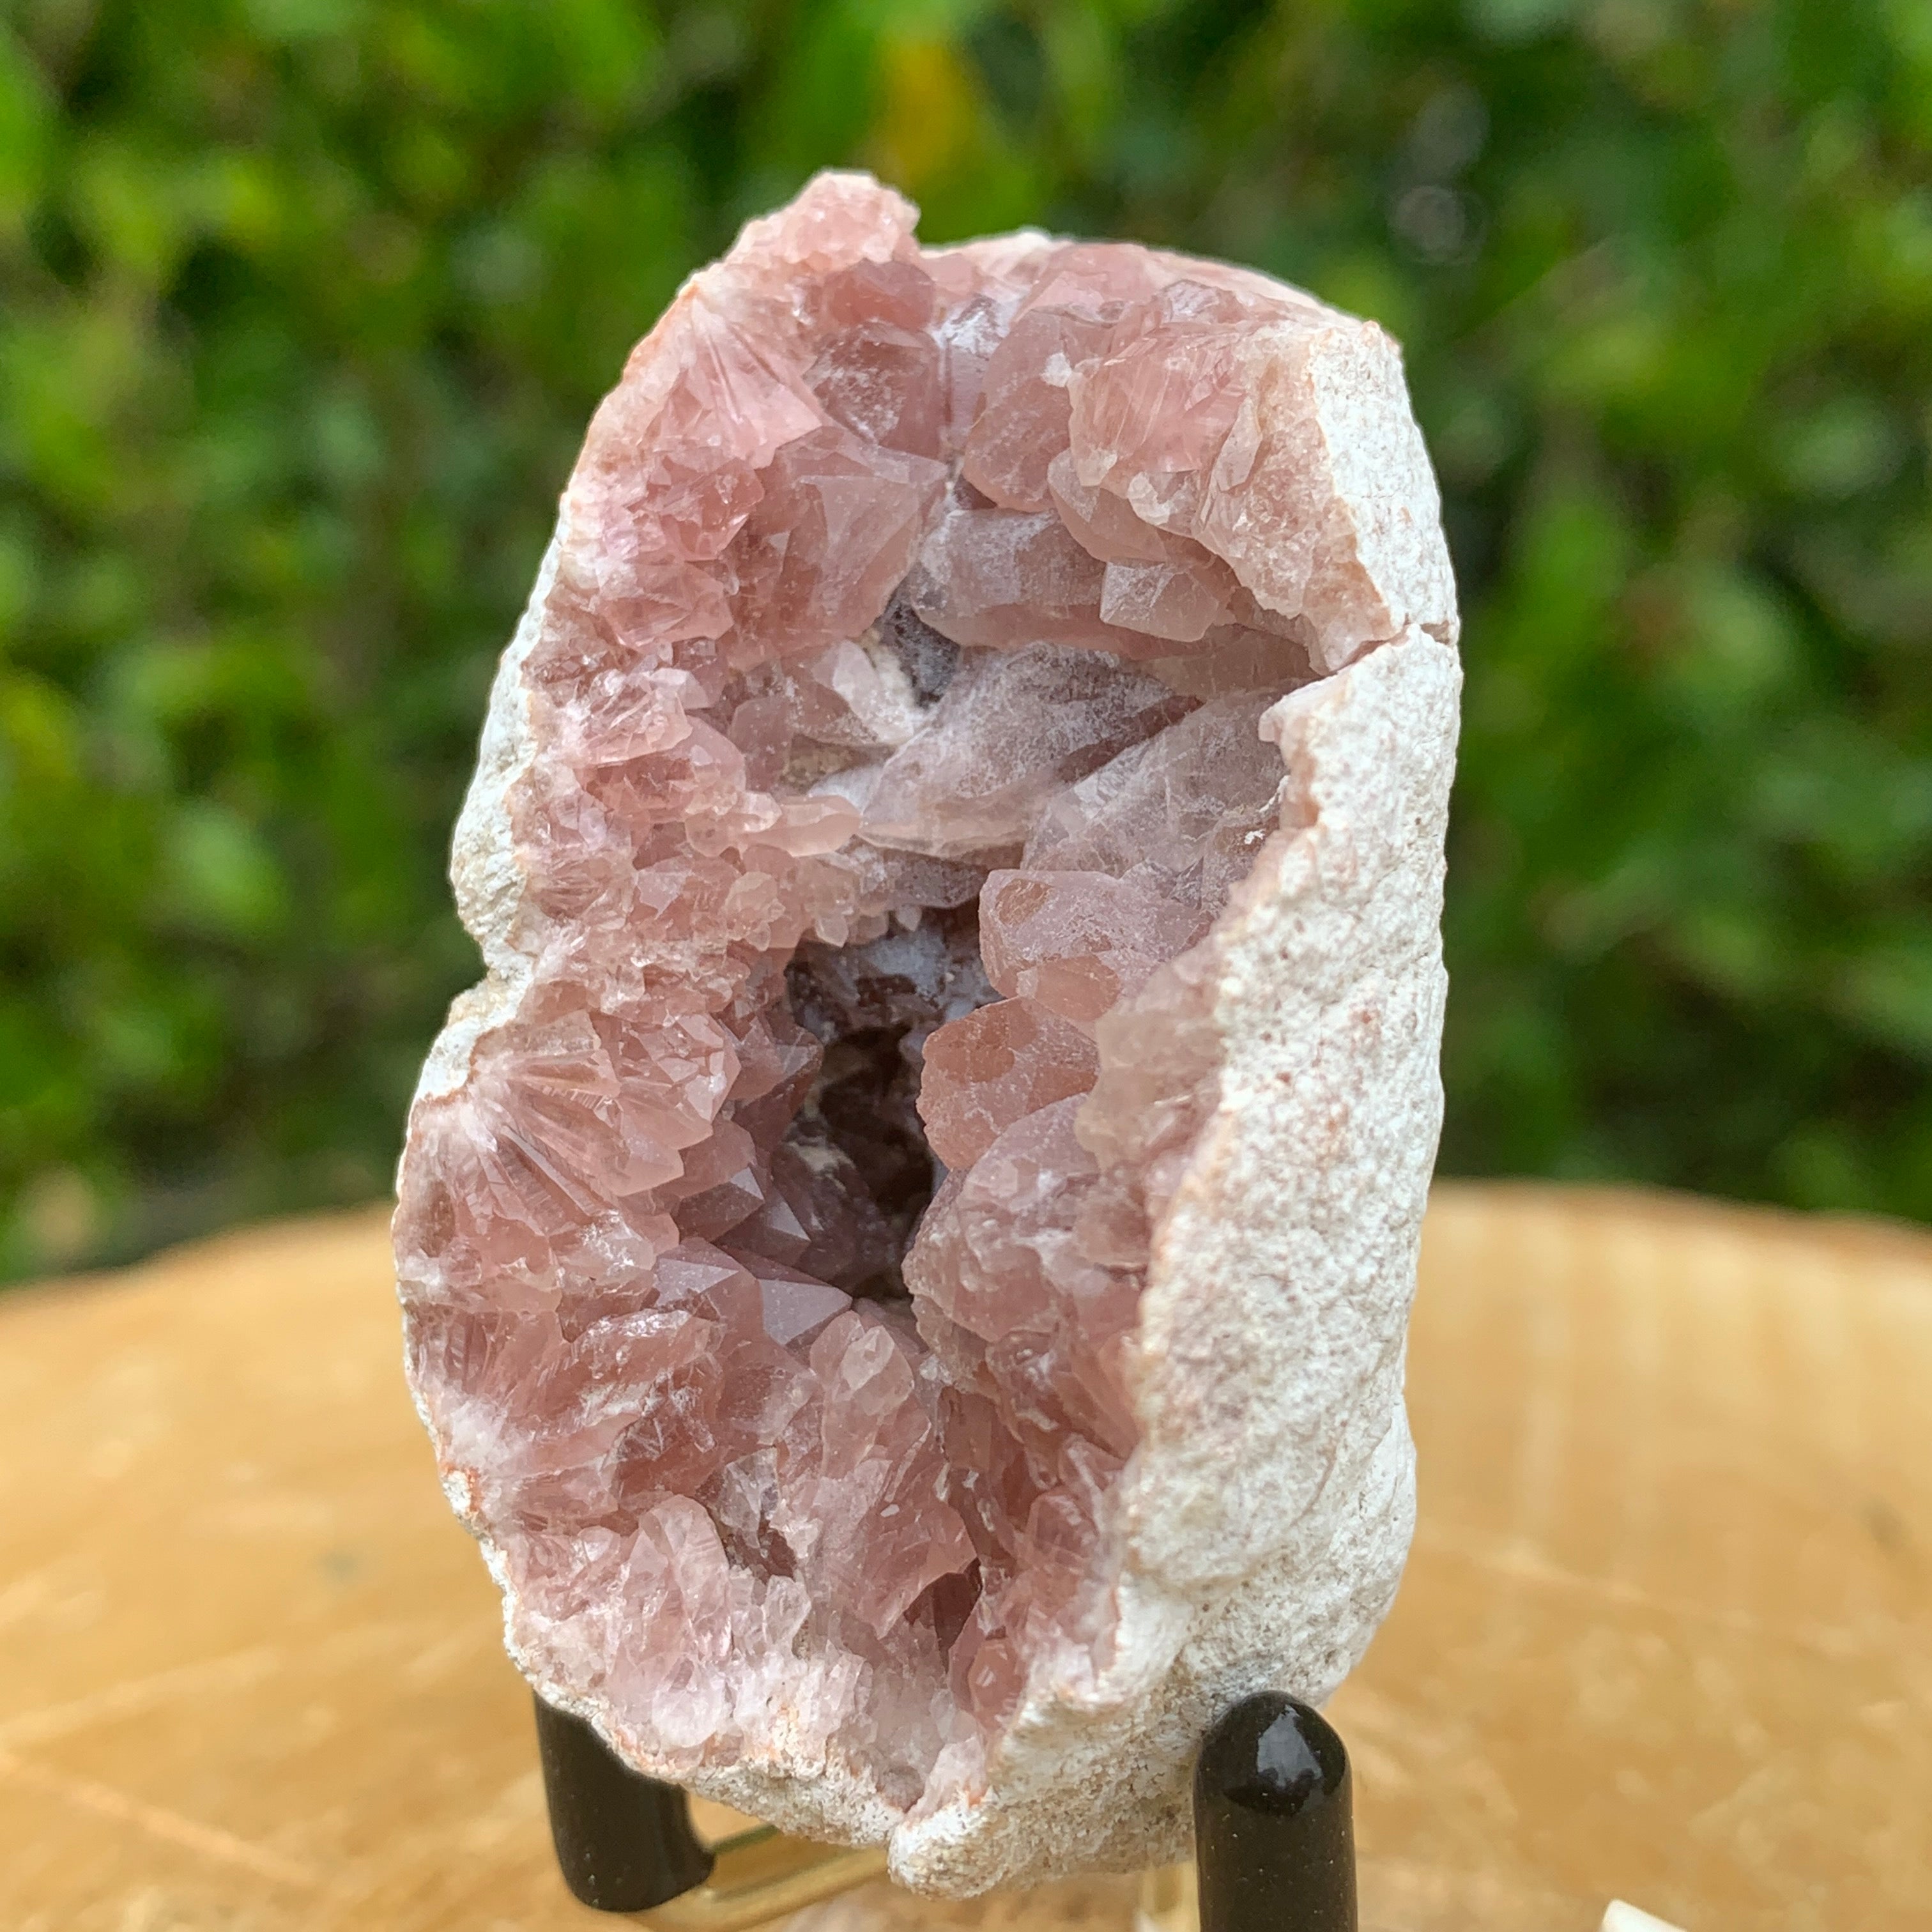 56.0g 6x4x4cm Pink Pink Amethyst from Argentina